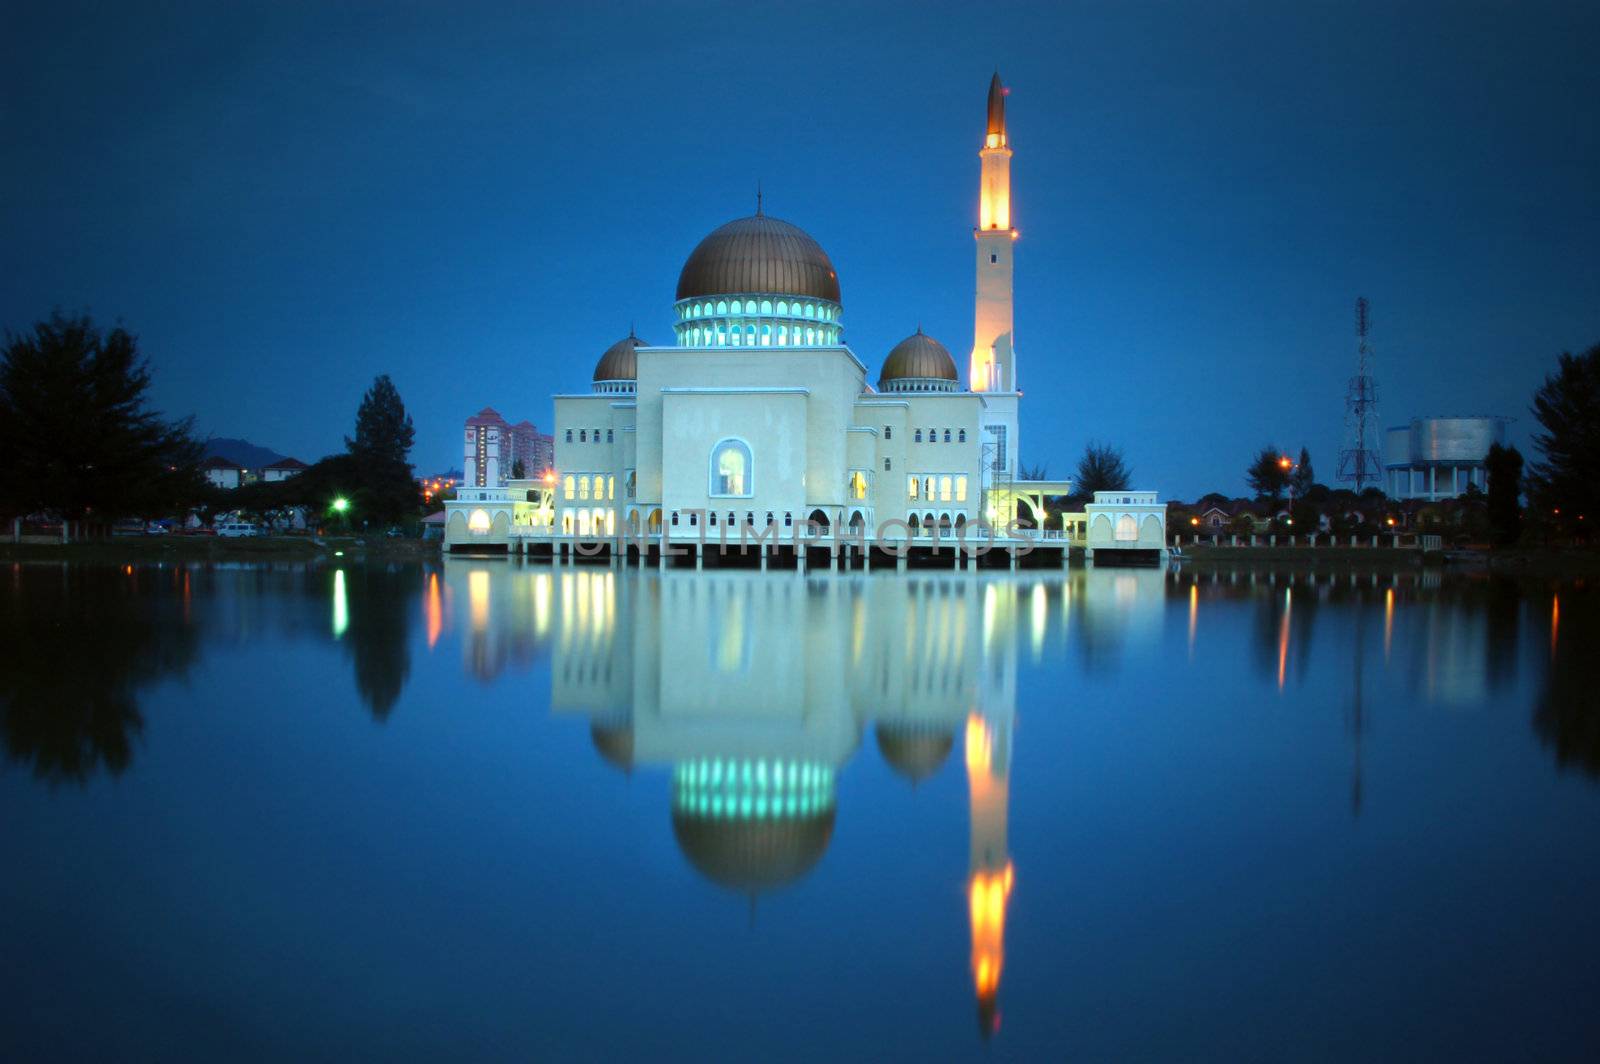 Puchong perdana Mosque in Malaysia. 25 seconds long exposure in dusk. 